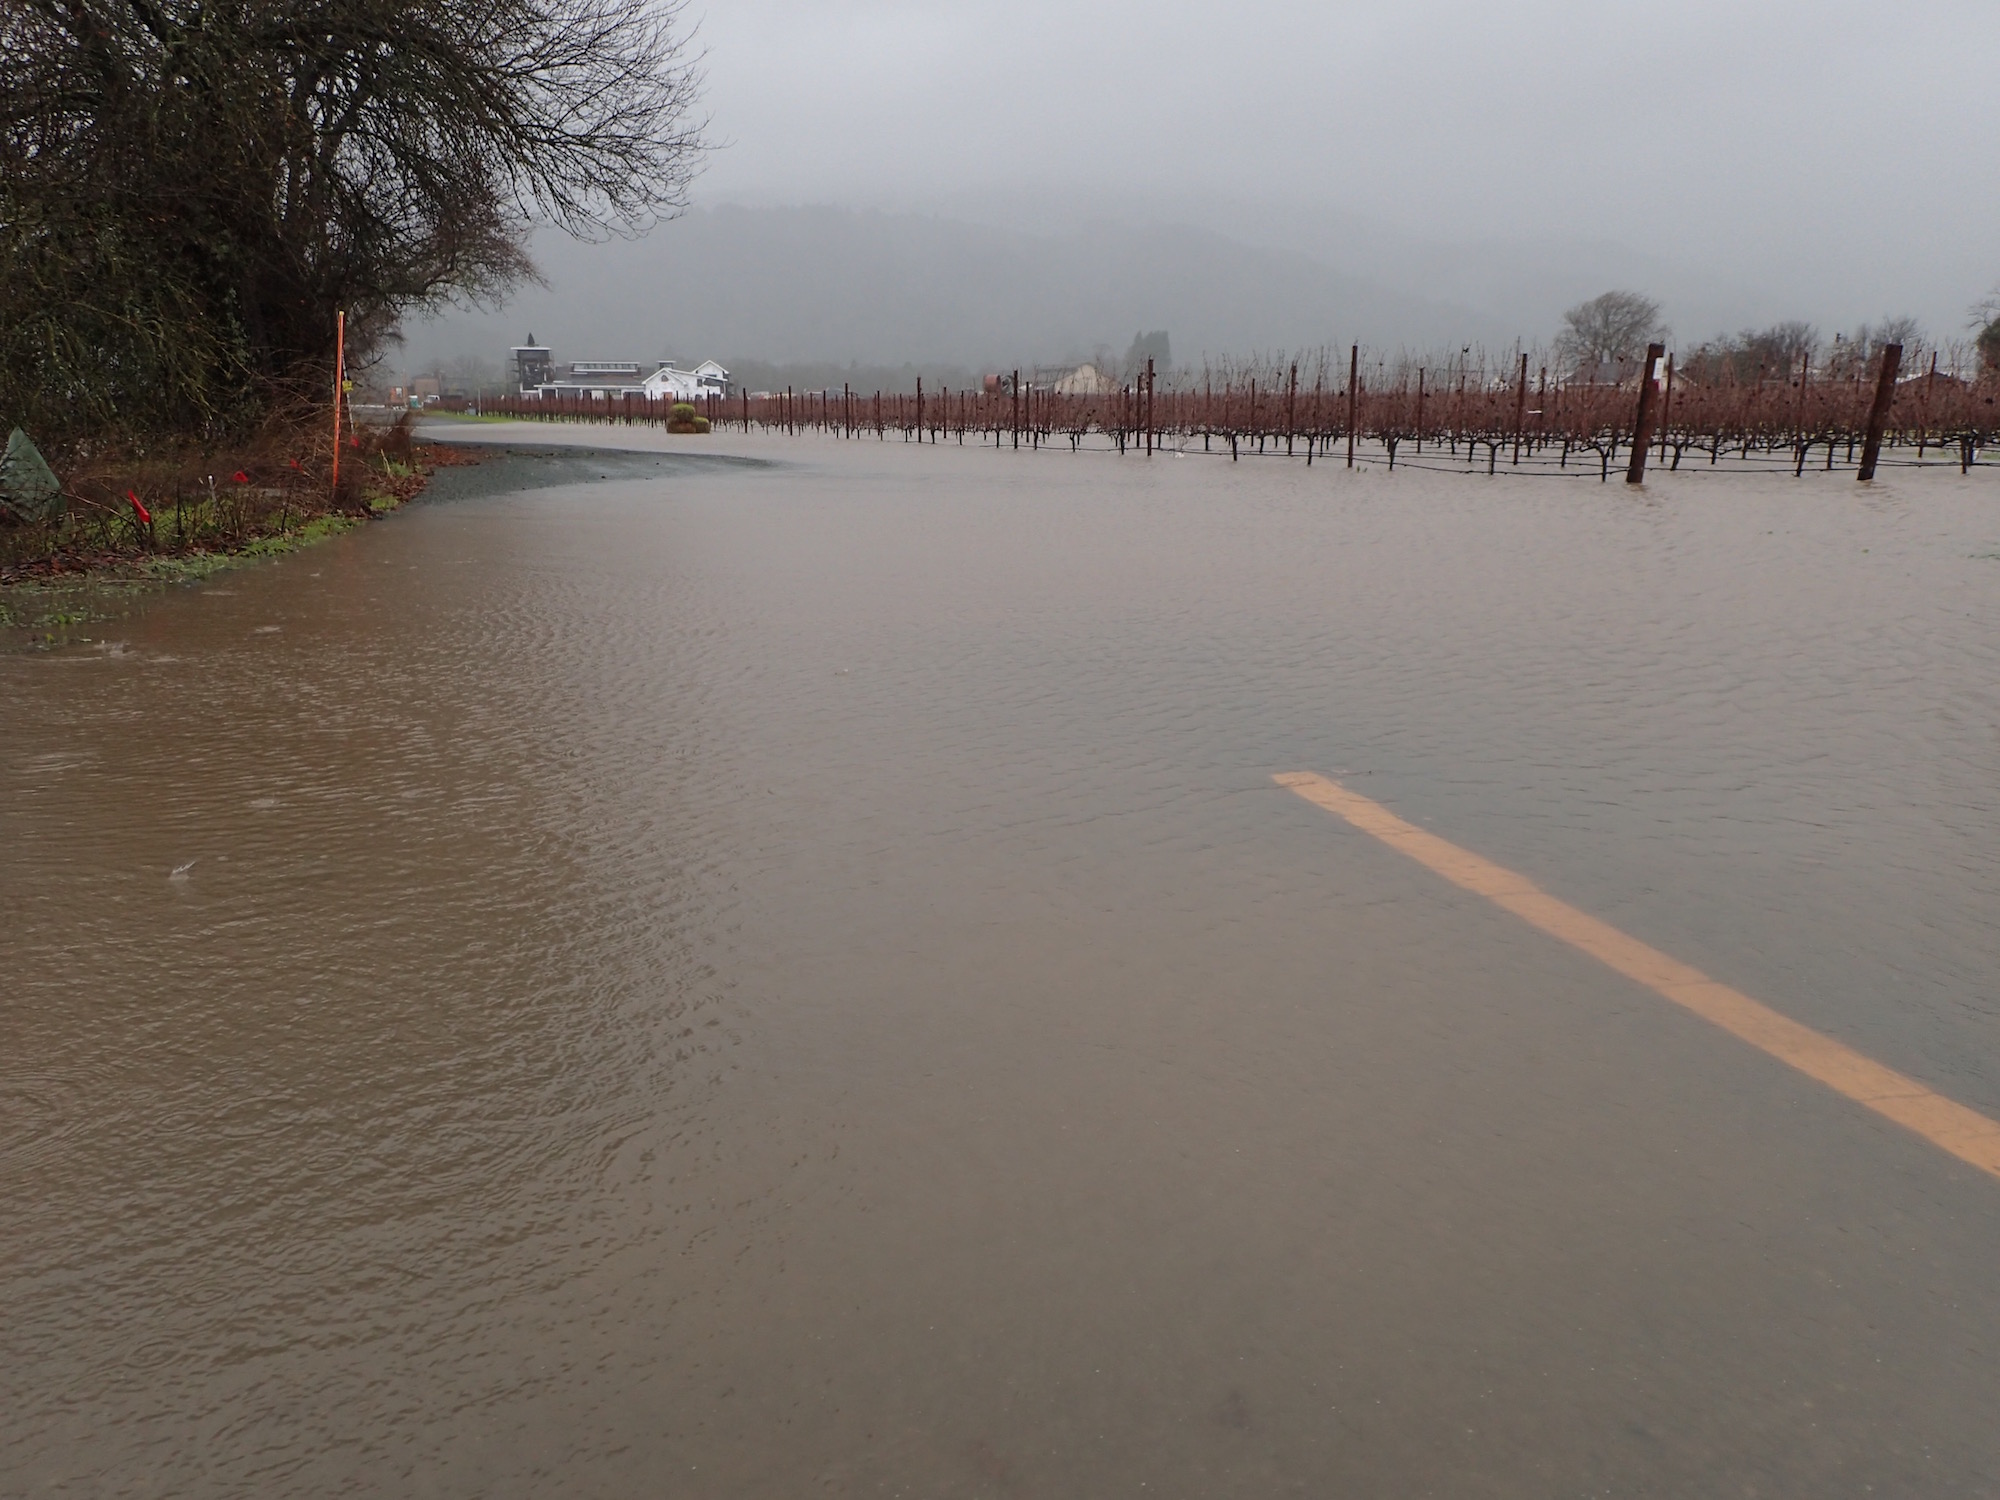 Flooded vineyards along Hwy 29 in the Napa Valley. Standing water like this will slowly sink in, helping to recharge groundwater aquifers.